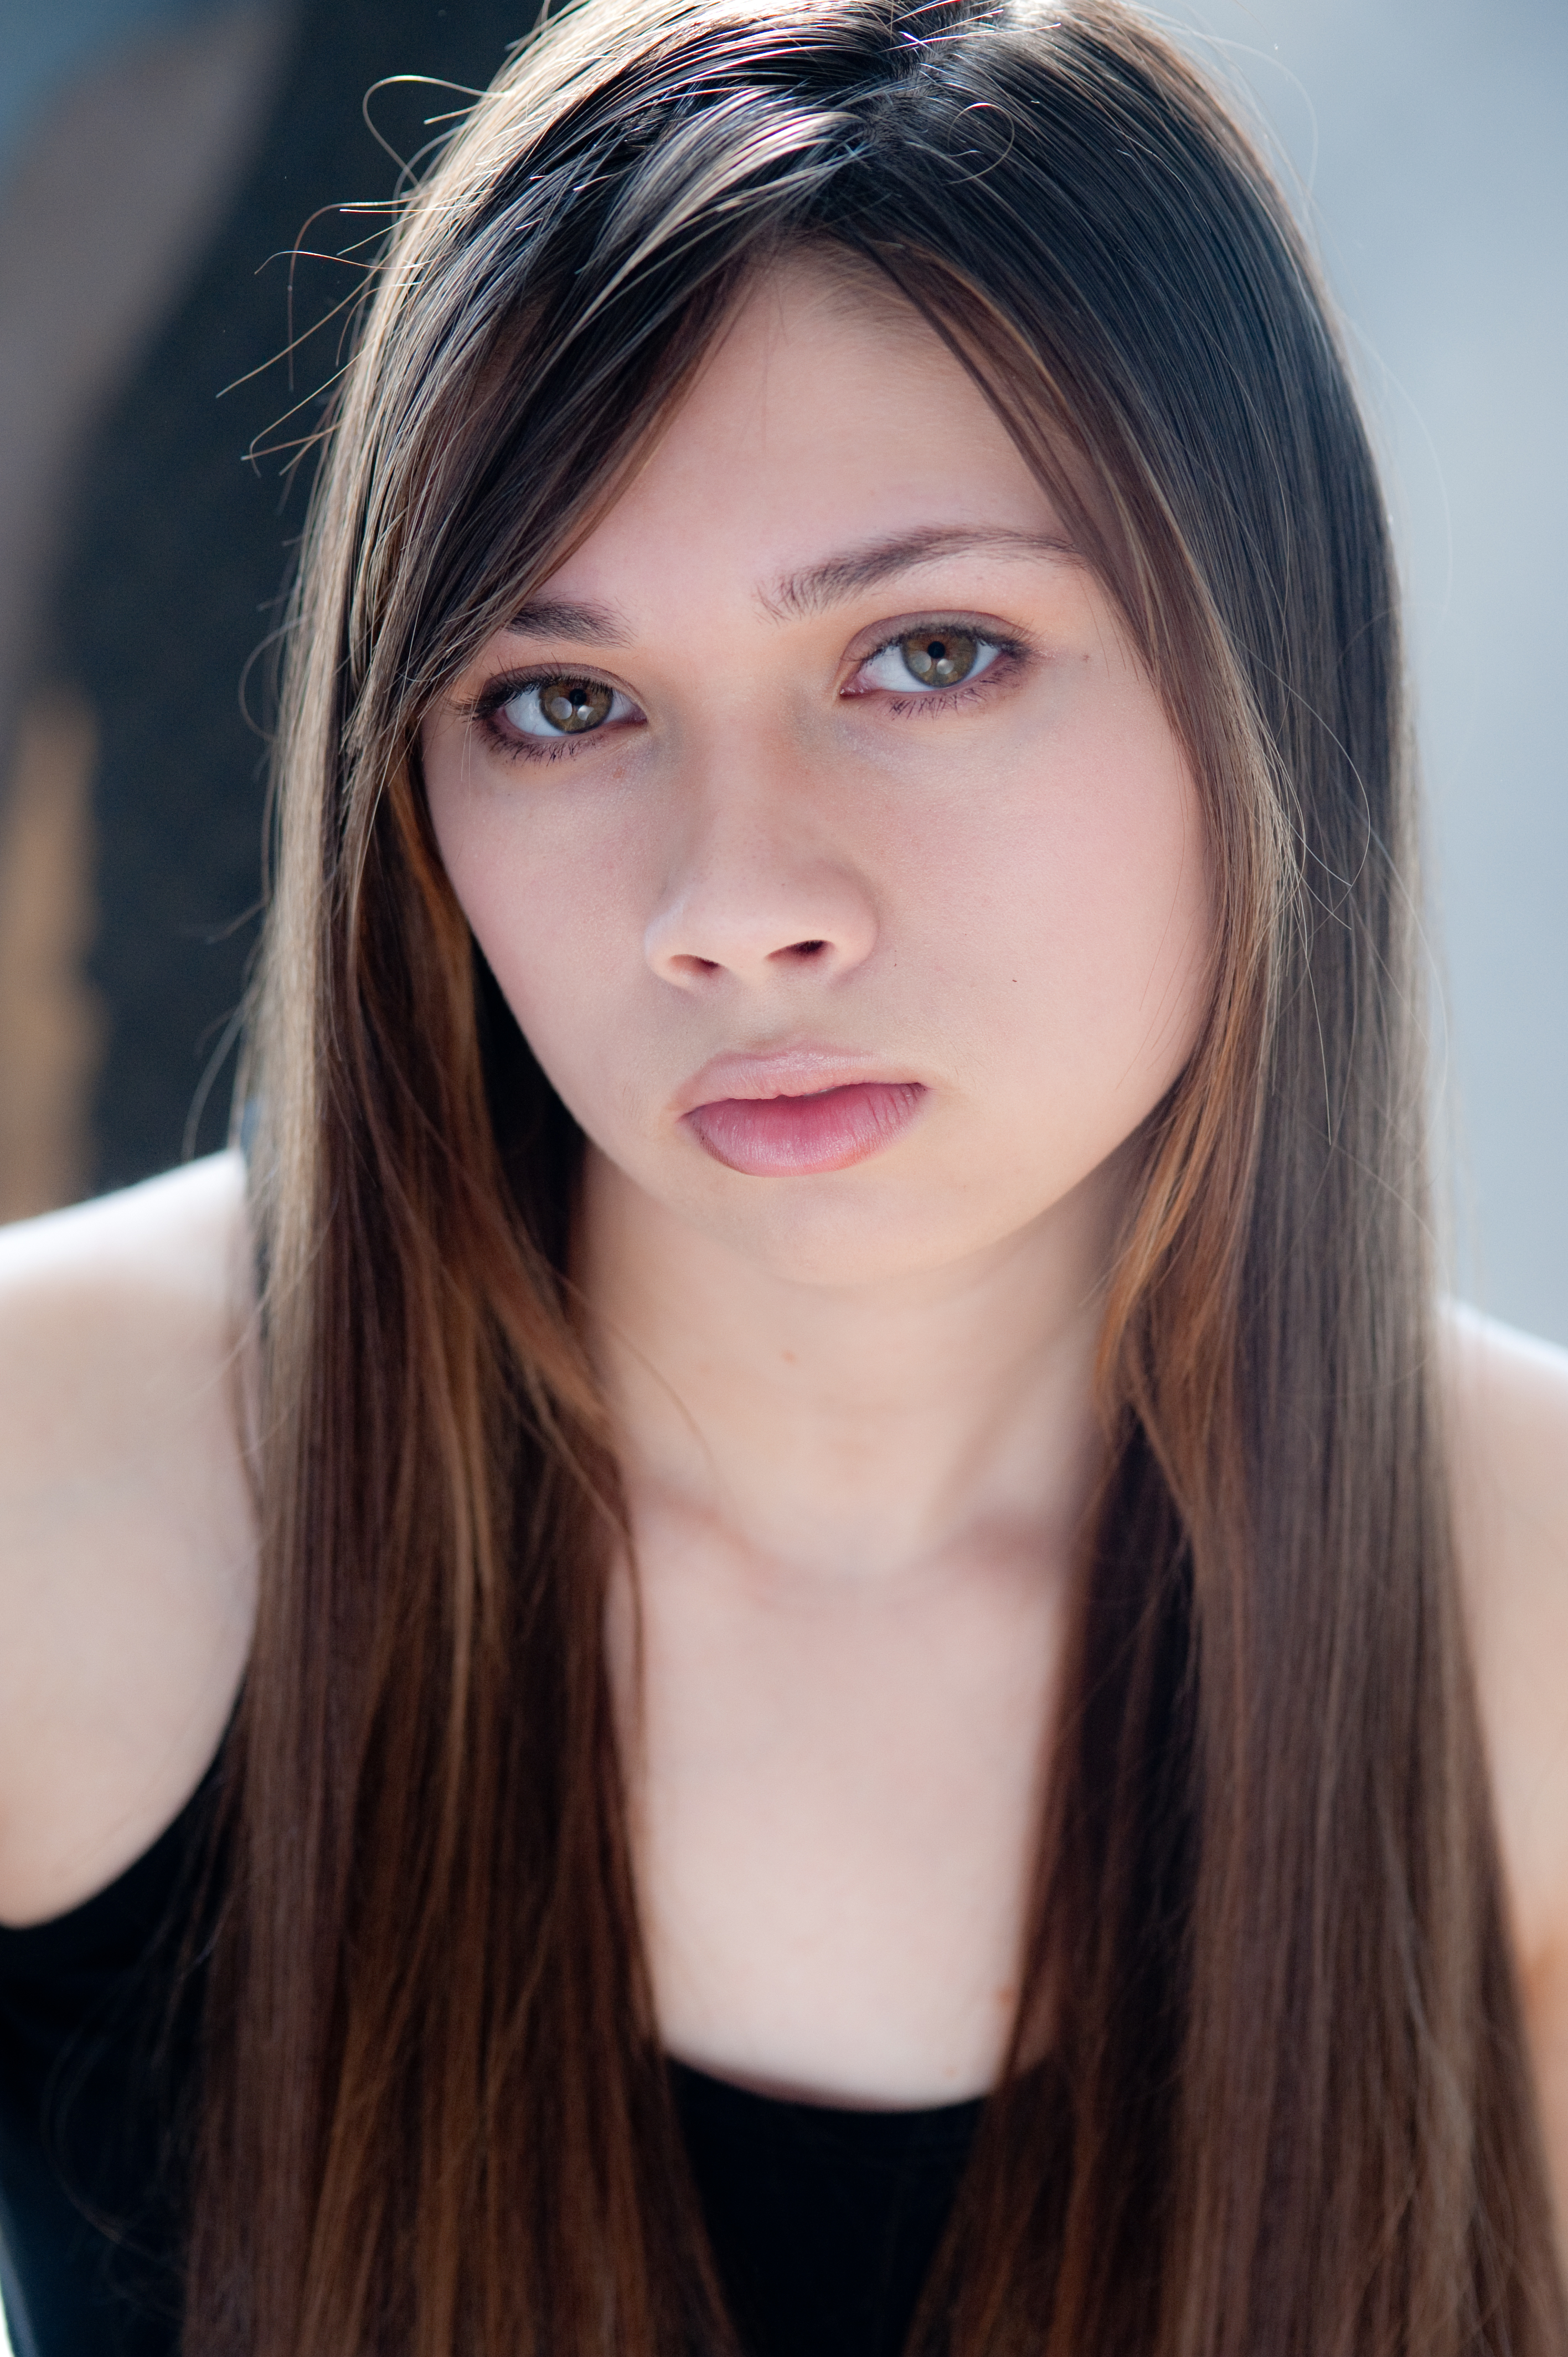 Tatiana Mclane is known for G.B.F., Helicopter Mom, Student Project, Moon Dust (2014)